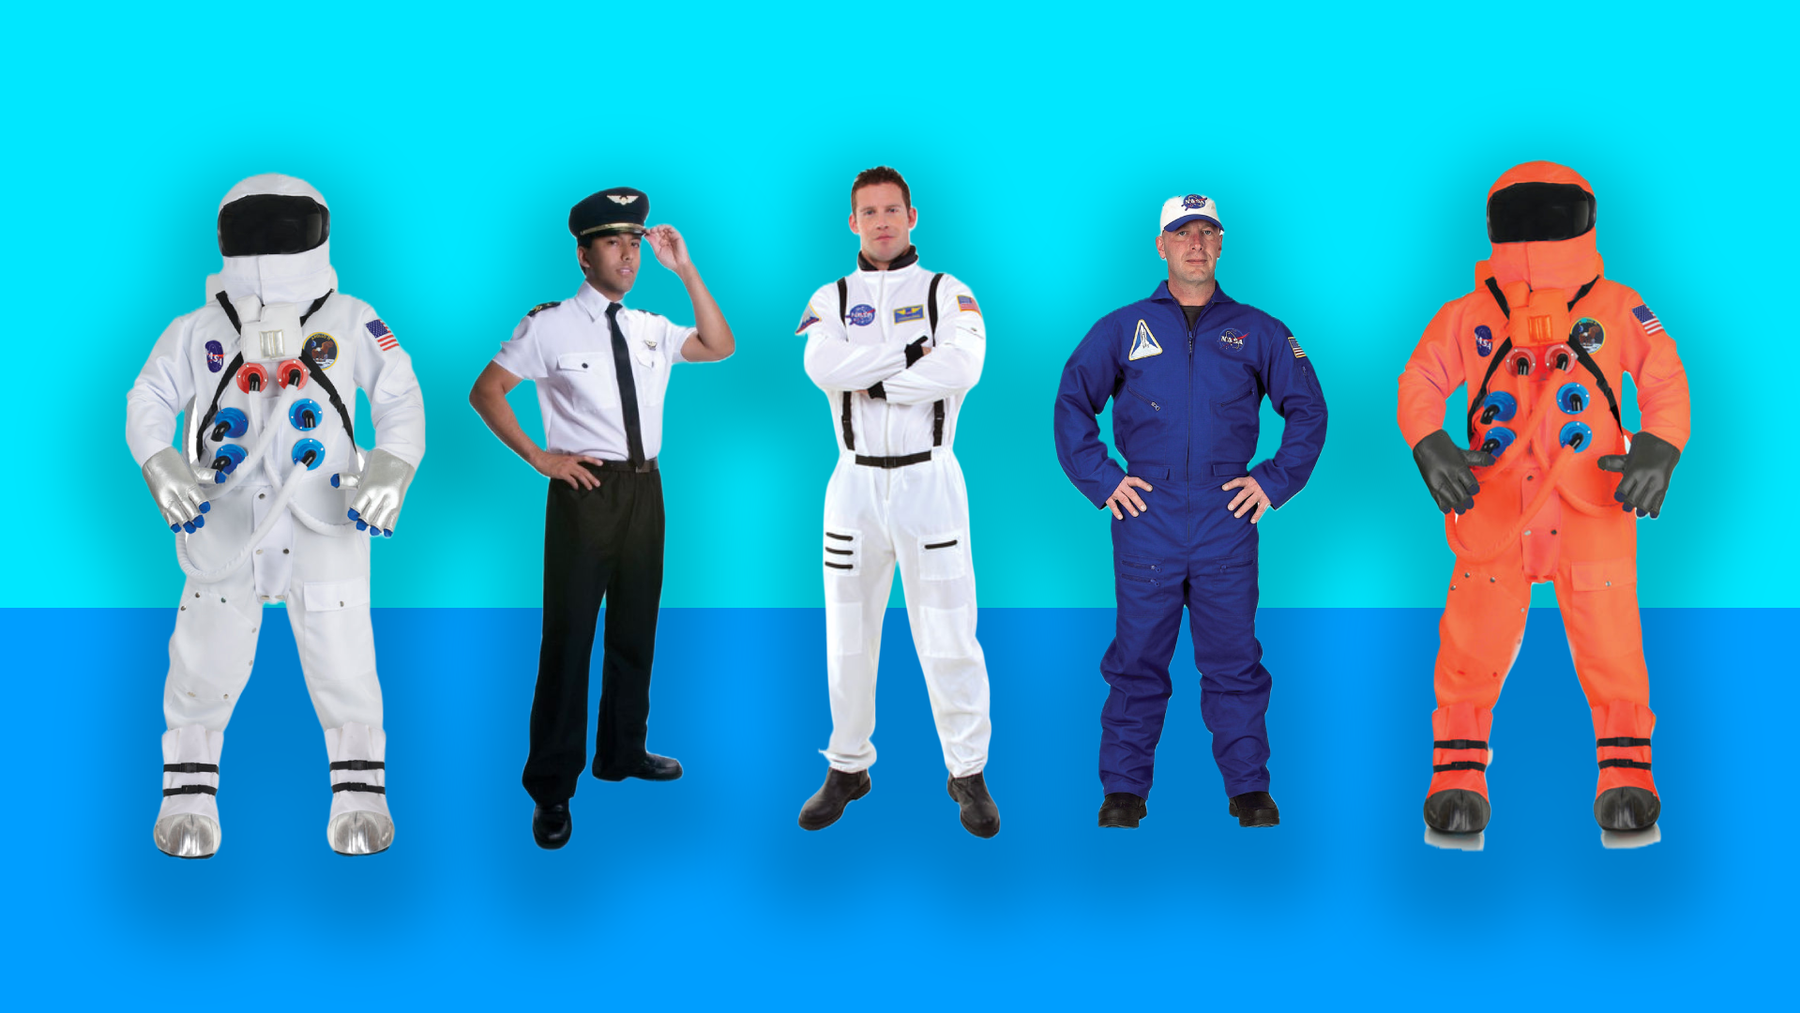 Take Flight with our Out-of-this-World Top 5 Men's Astronauts & Pilots Costumes